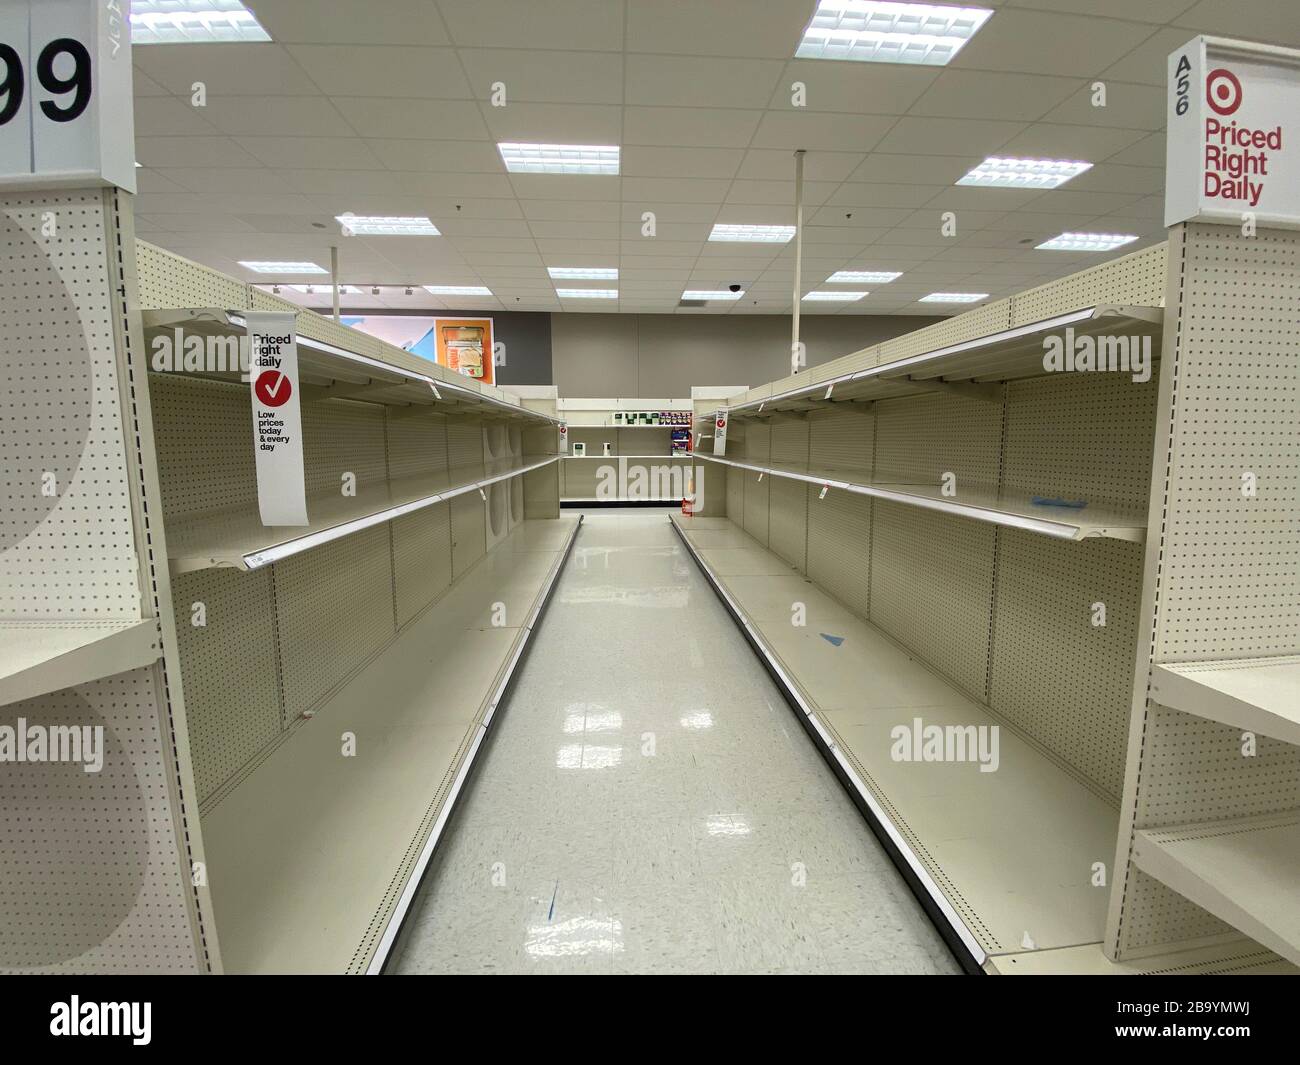 Empty Shelves at Target Superstore Stock Photo